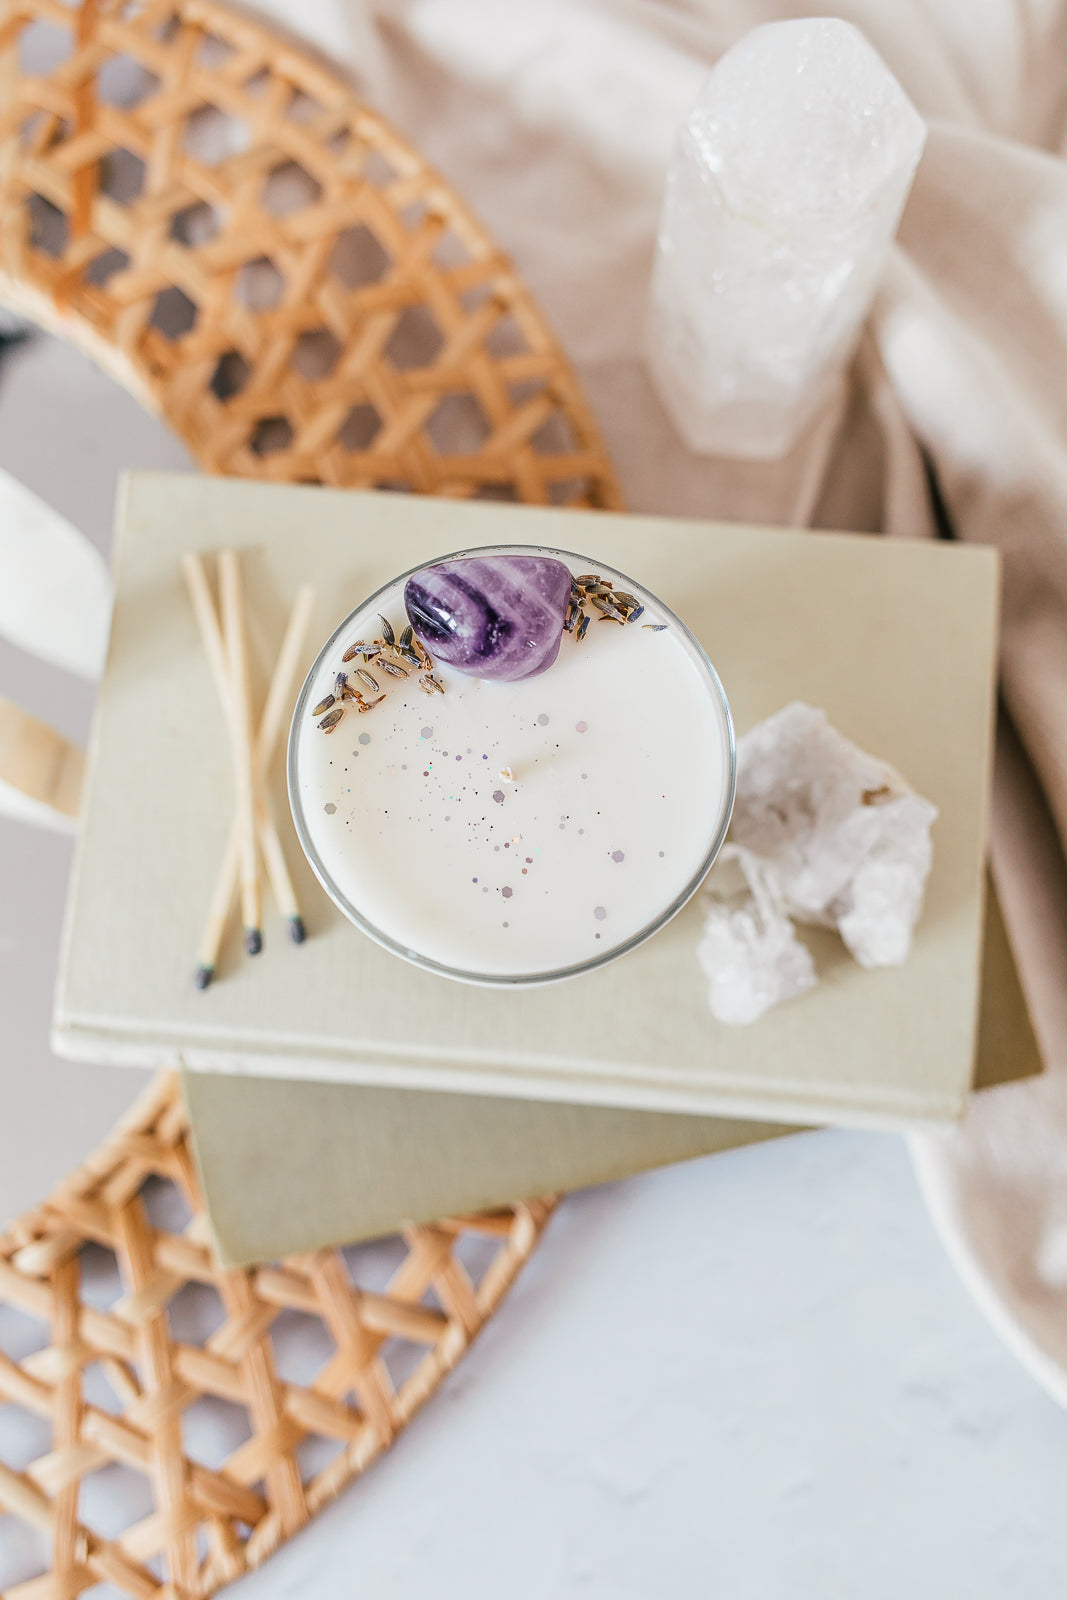 Classic Amethyst - Lavender & Camomile Candle